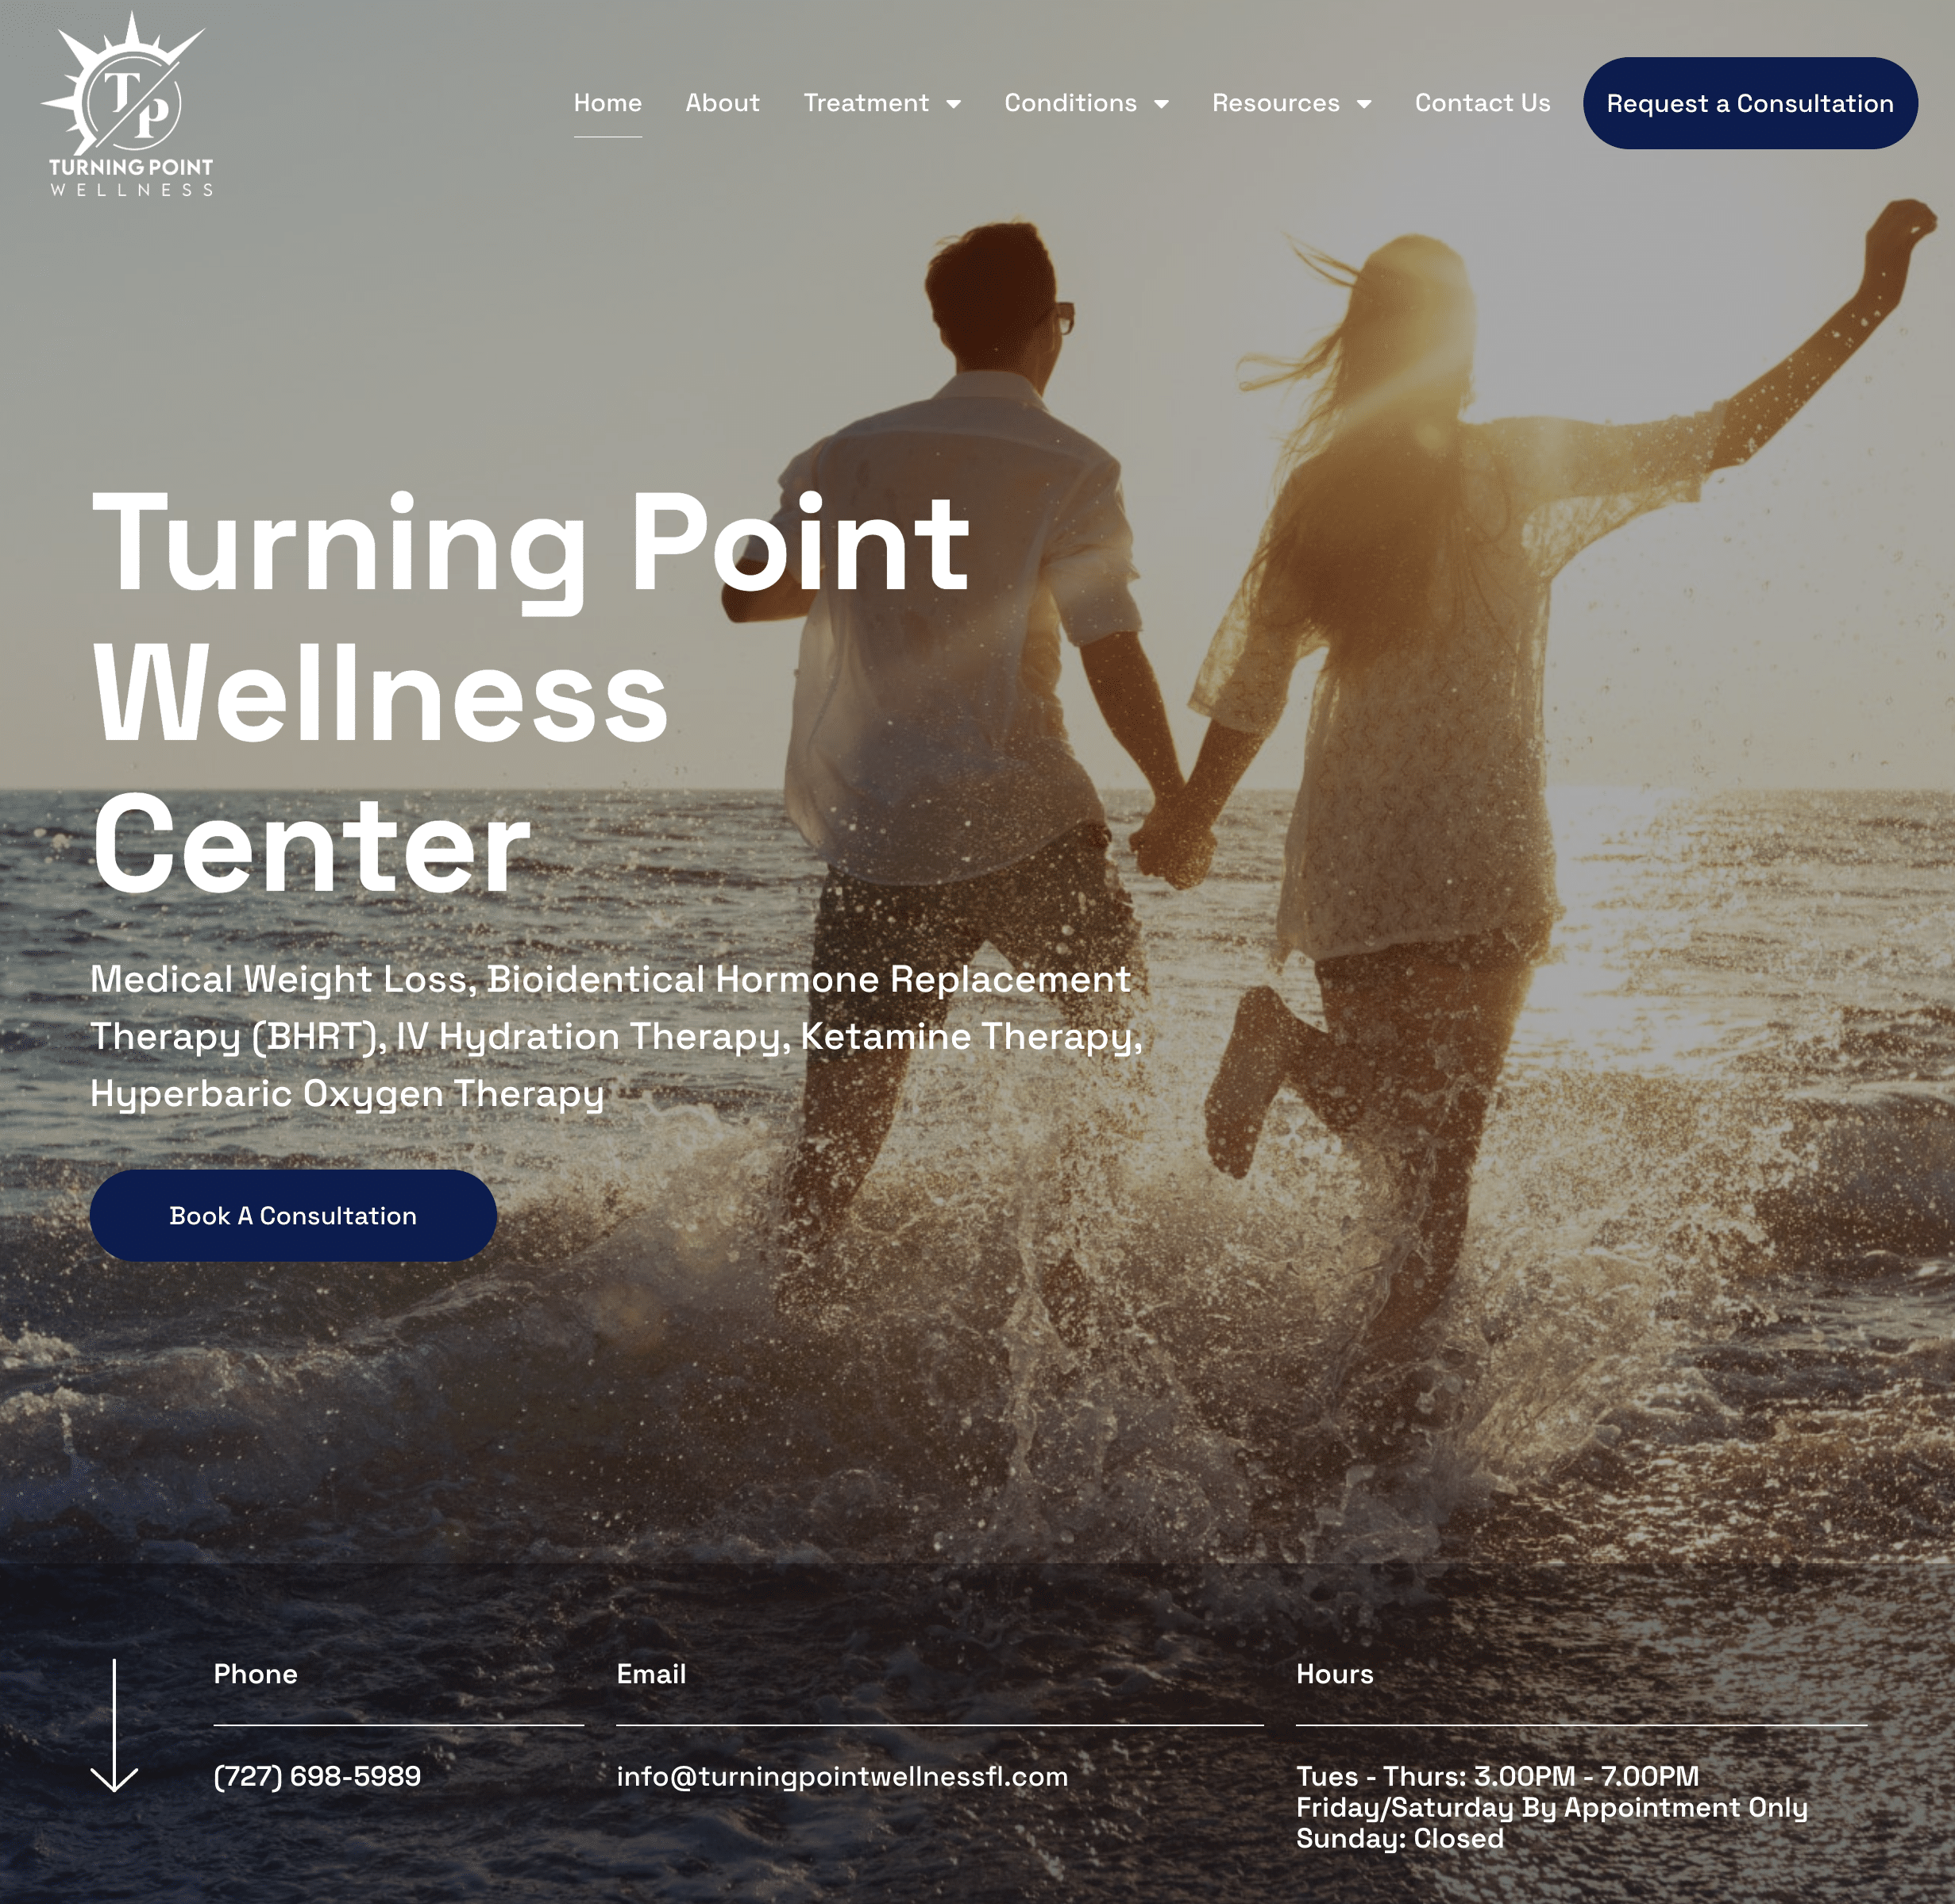 Turning Point Wellness Center Website Home Page